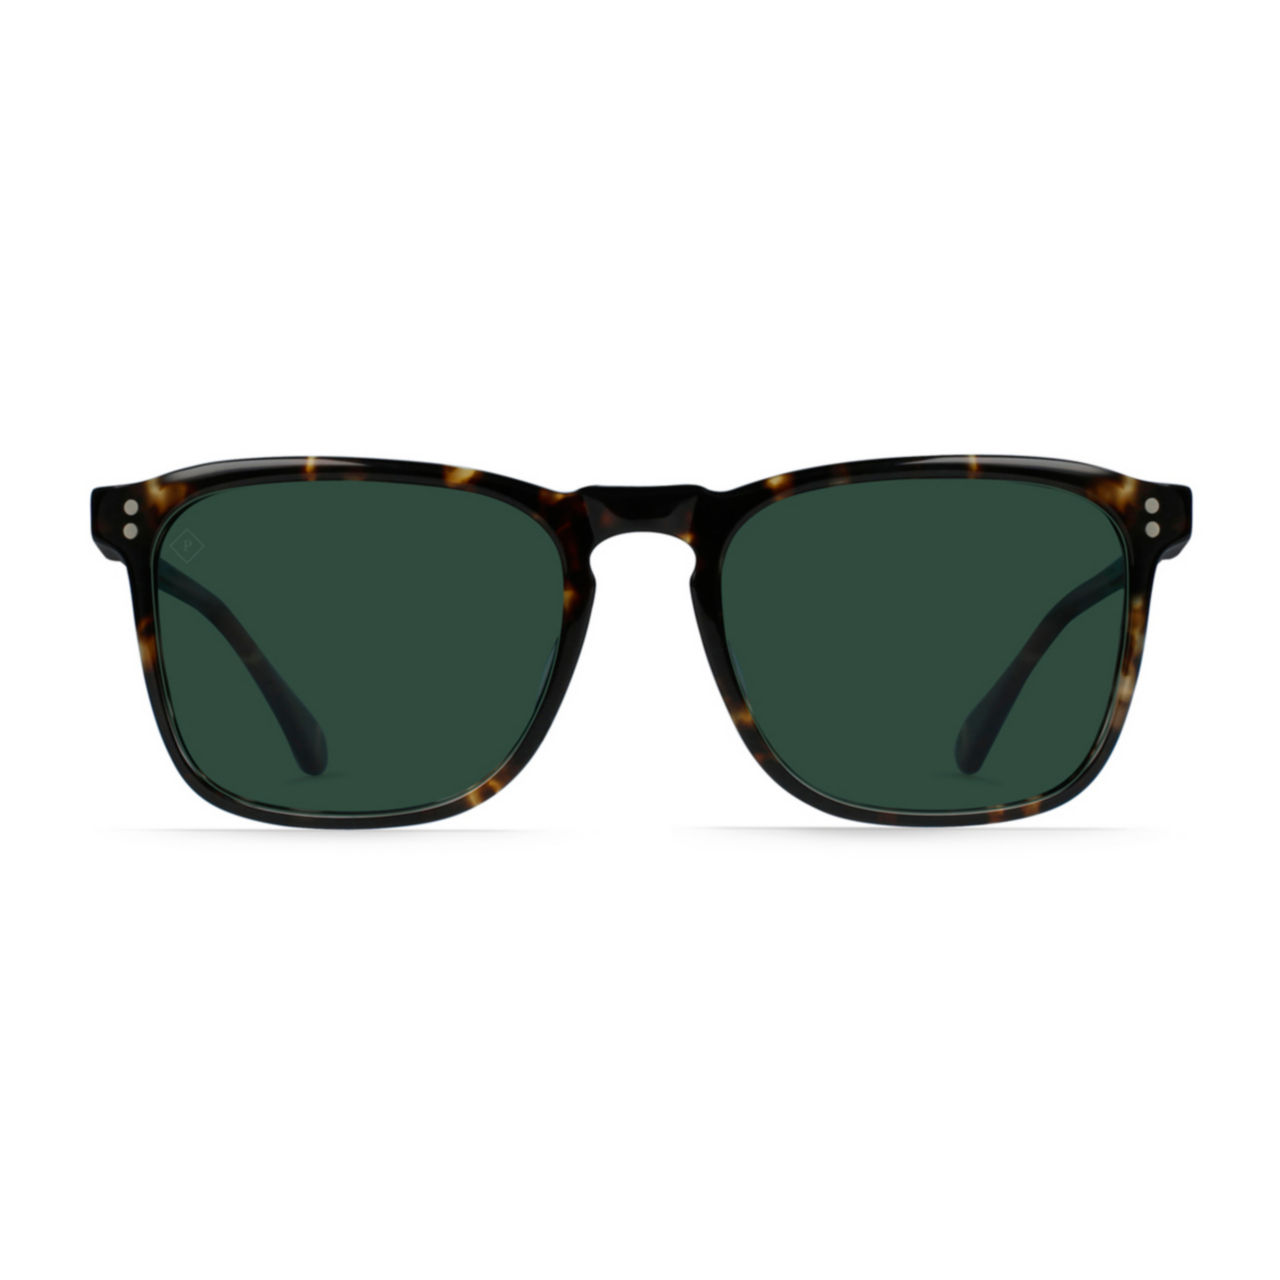 RAEN Wiley Sunglasses -  image number 1